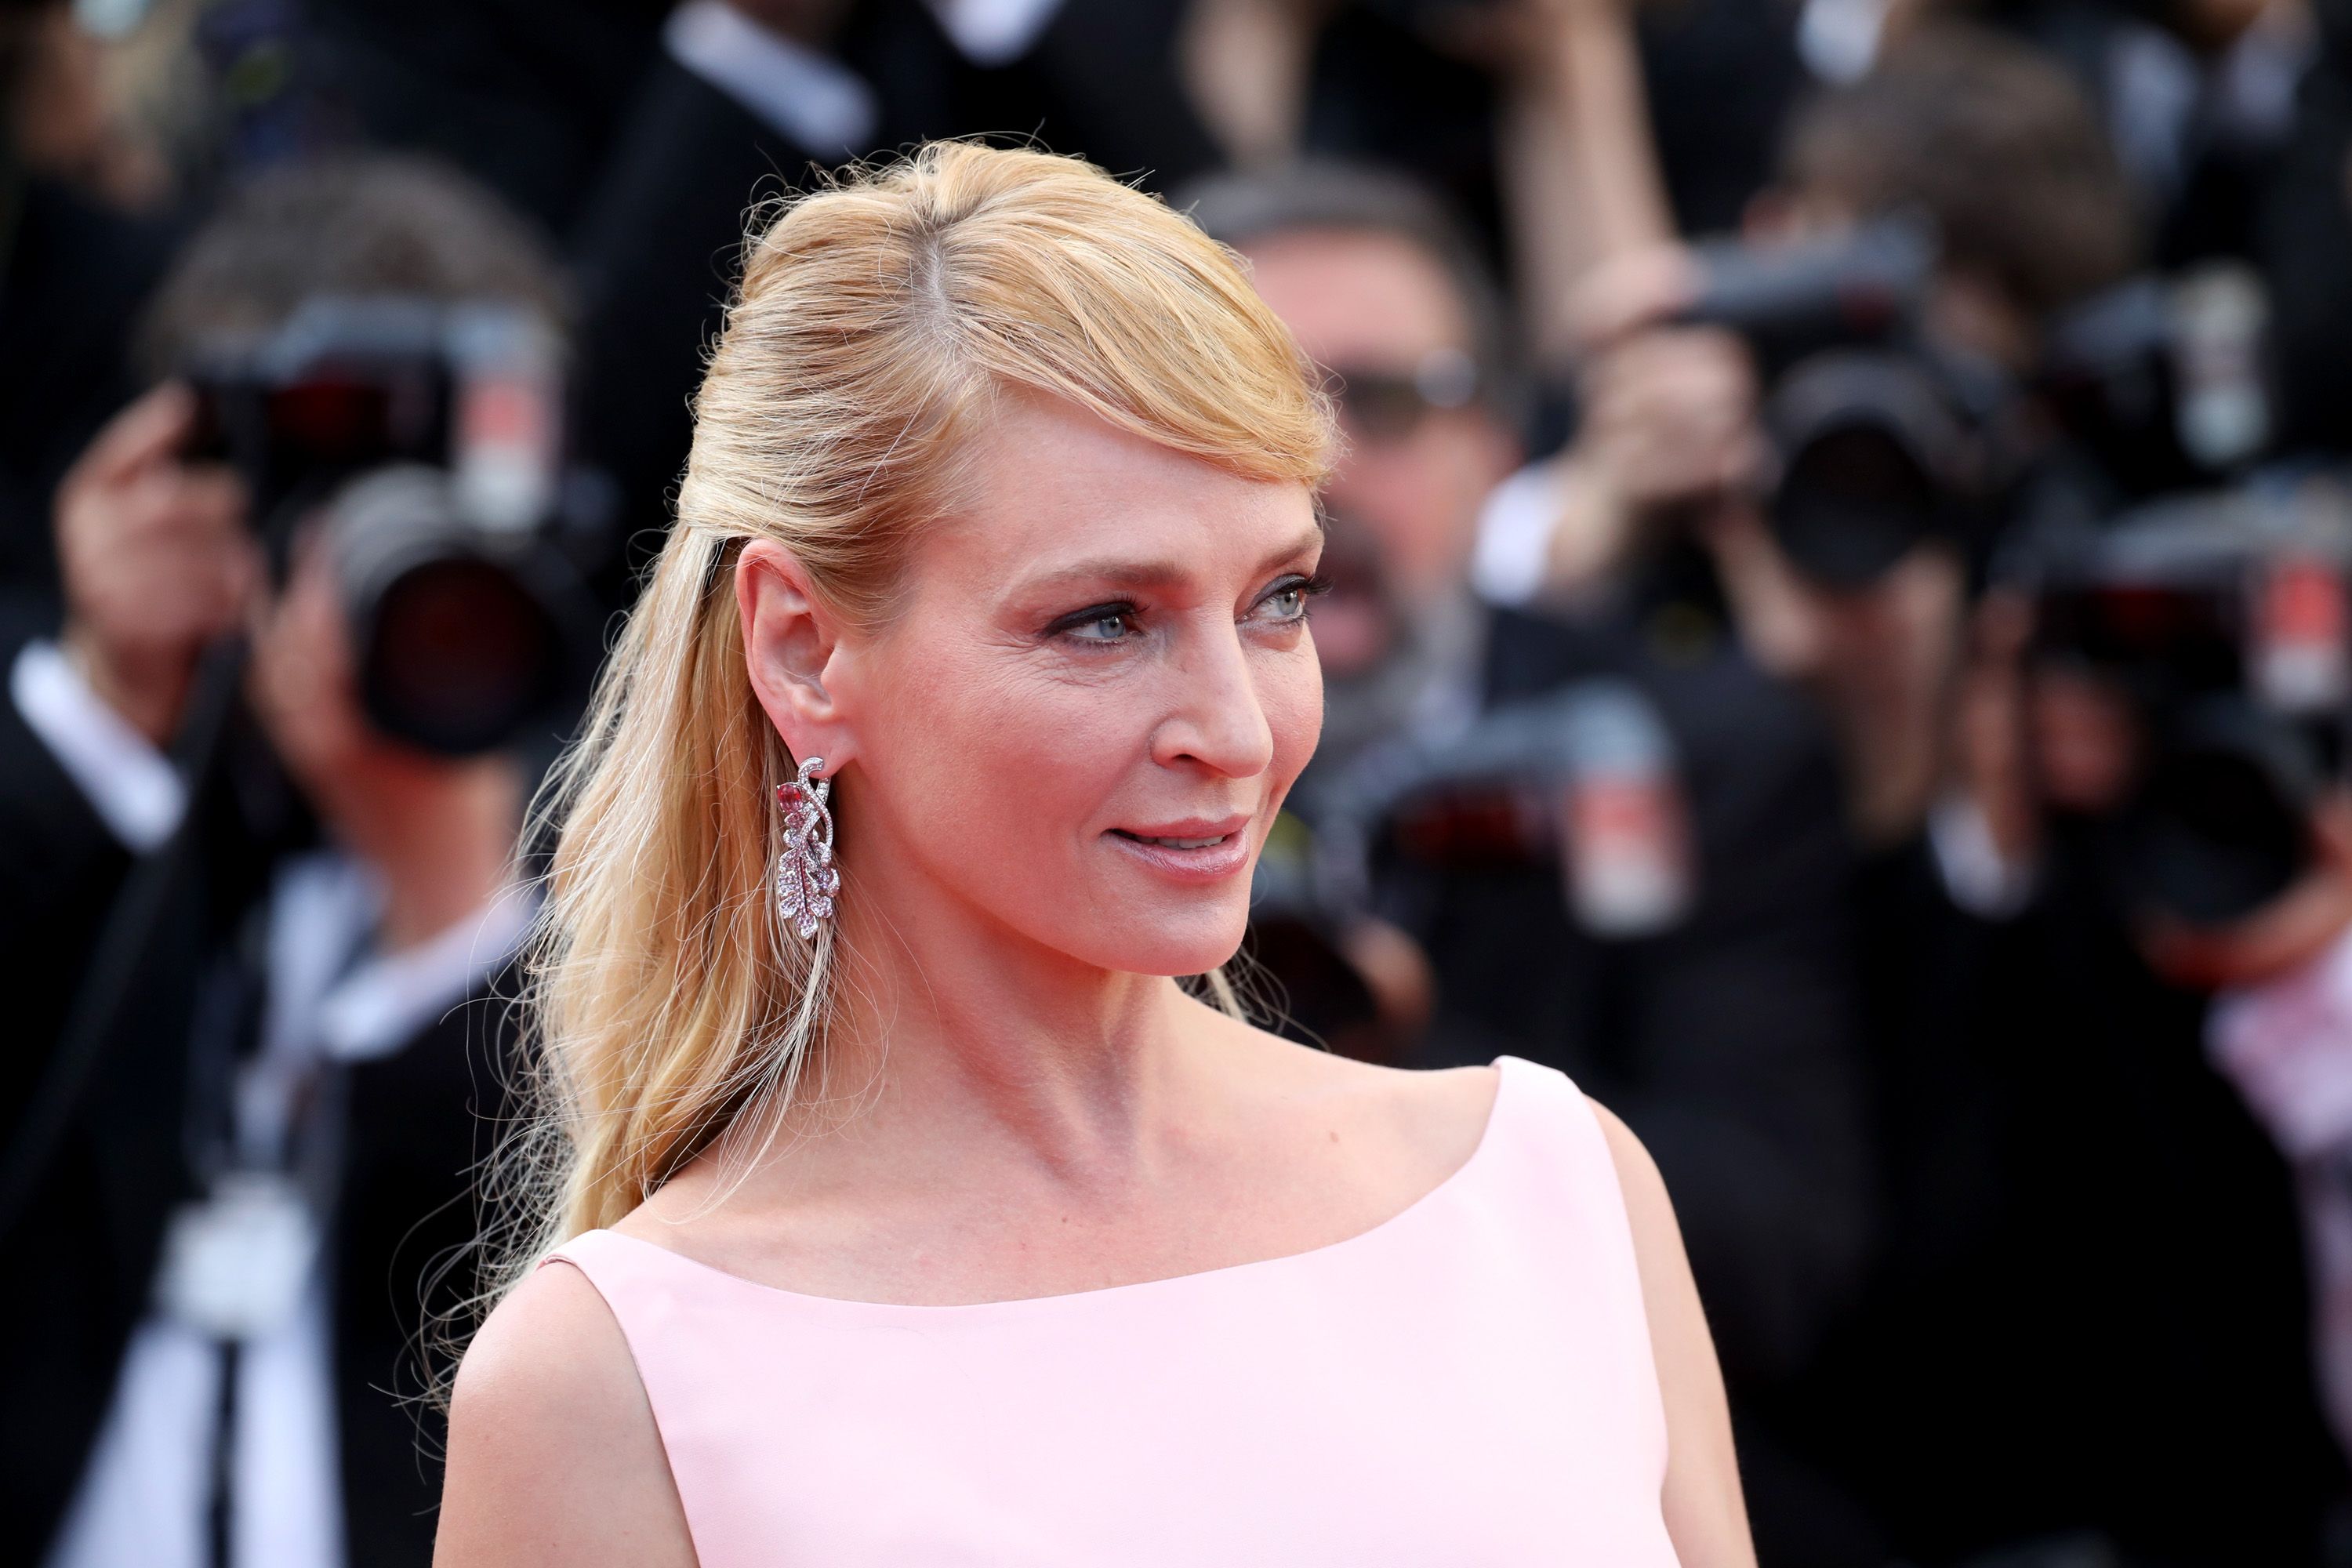  Uma Thurman attends the 70th Anniversary of the 70th annual Cannes Film Festival. | Source: Getty Images